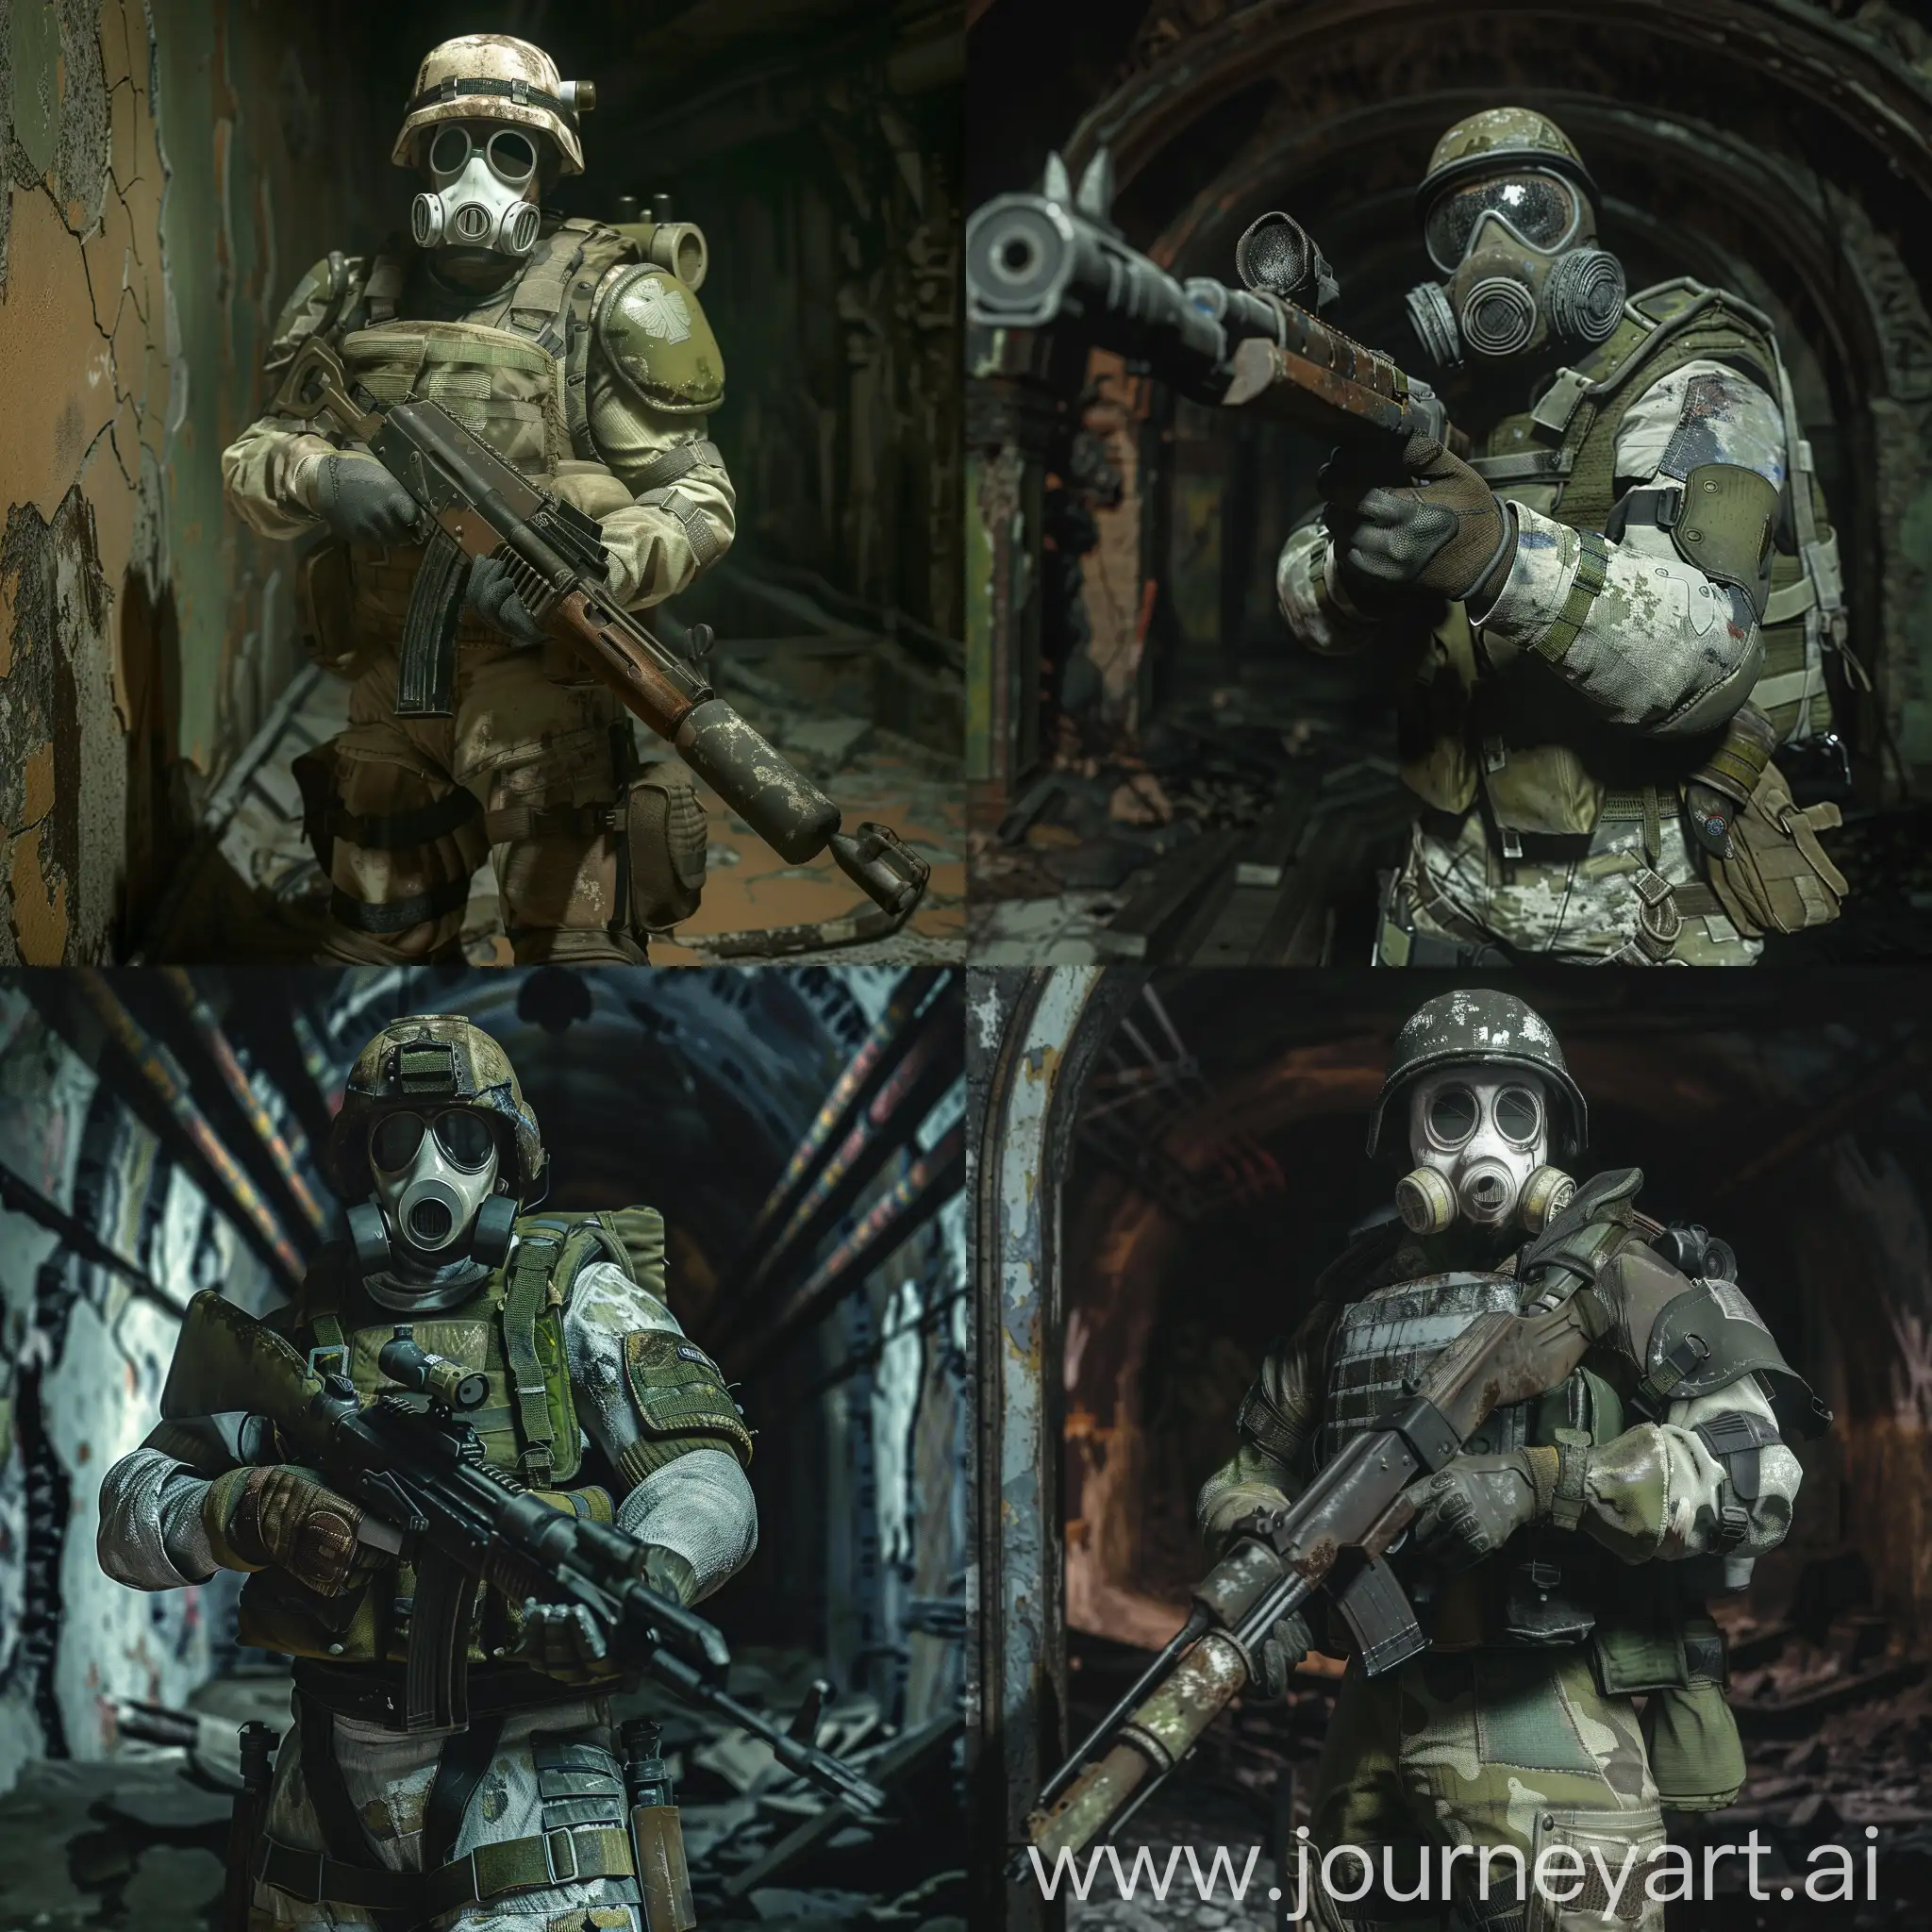 PostApocalyptic-Survivor-in-Abandoned-Catacombs-with-Soviet-Sniper-Rifle